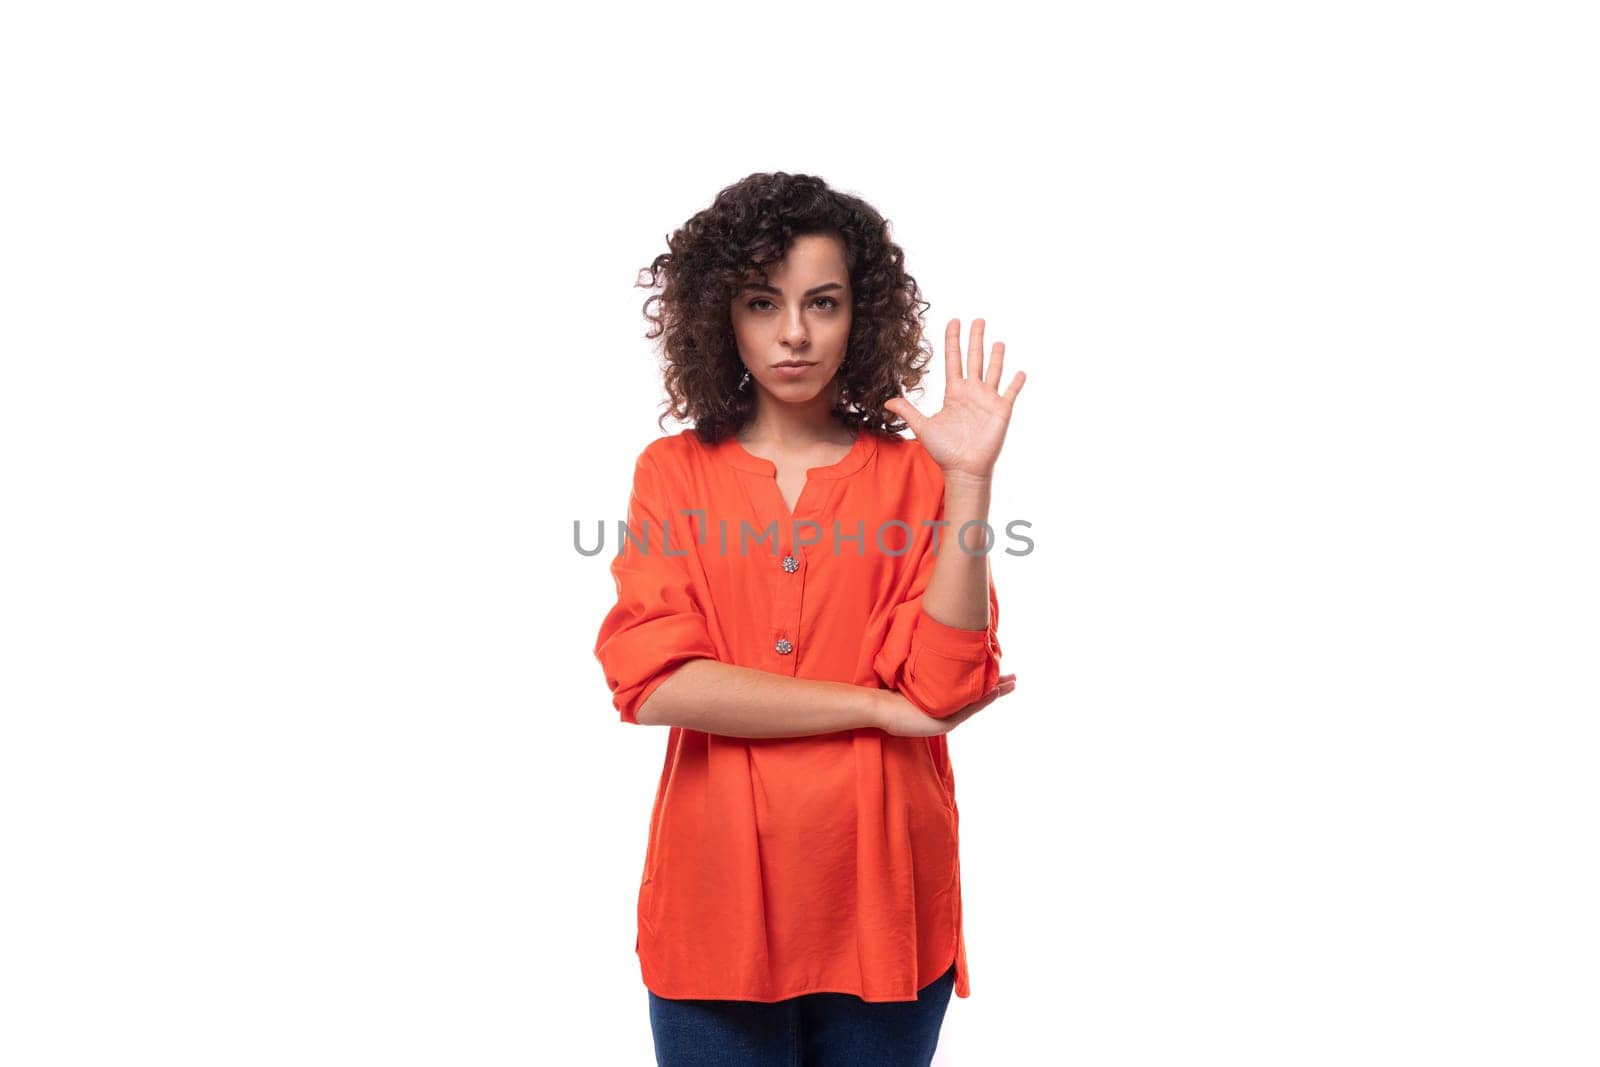 young smart caucasian business woman with wavy hair dressed in an orange blouse.